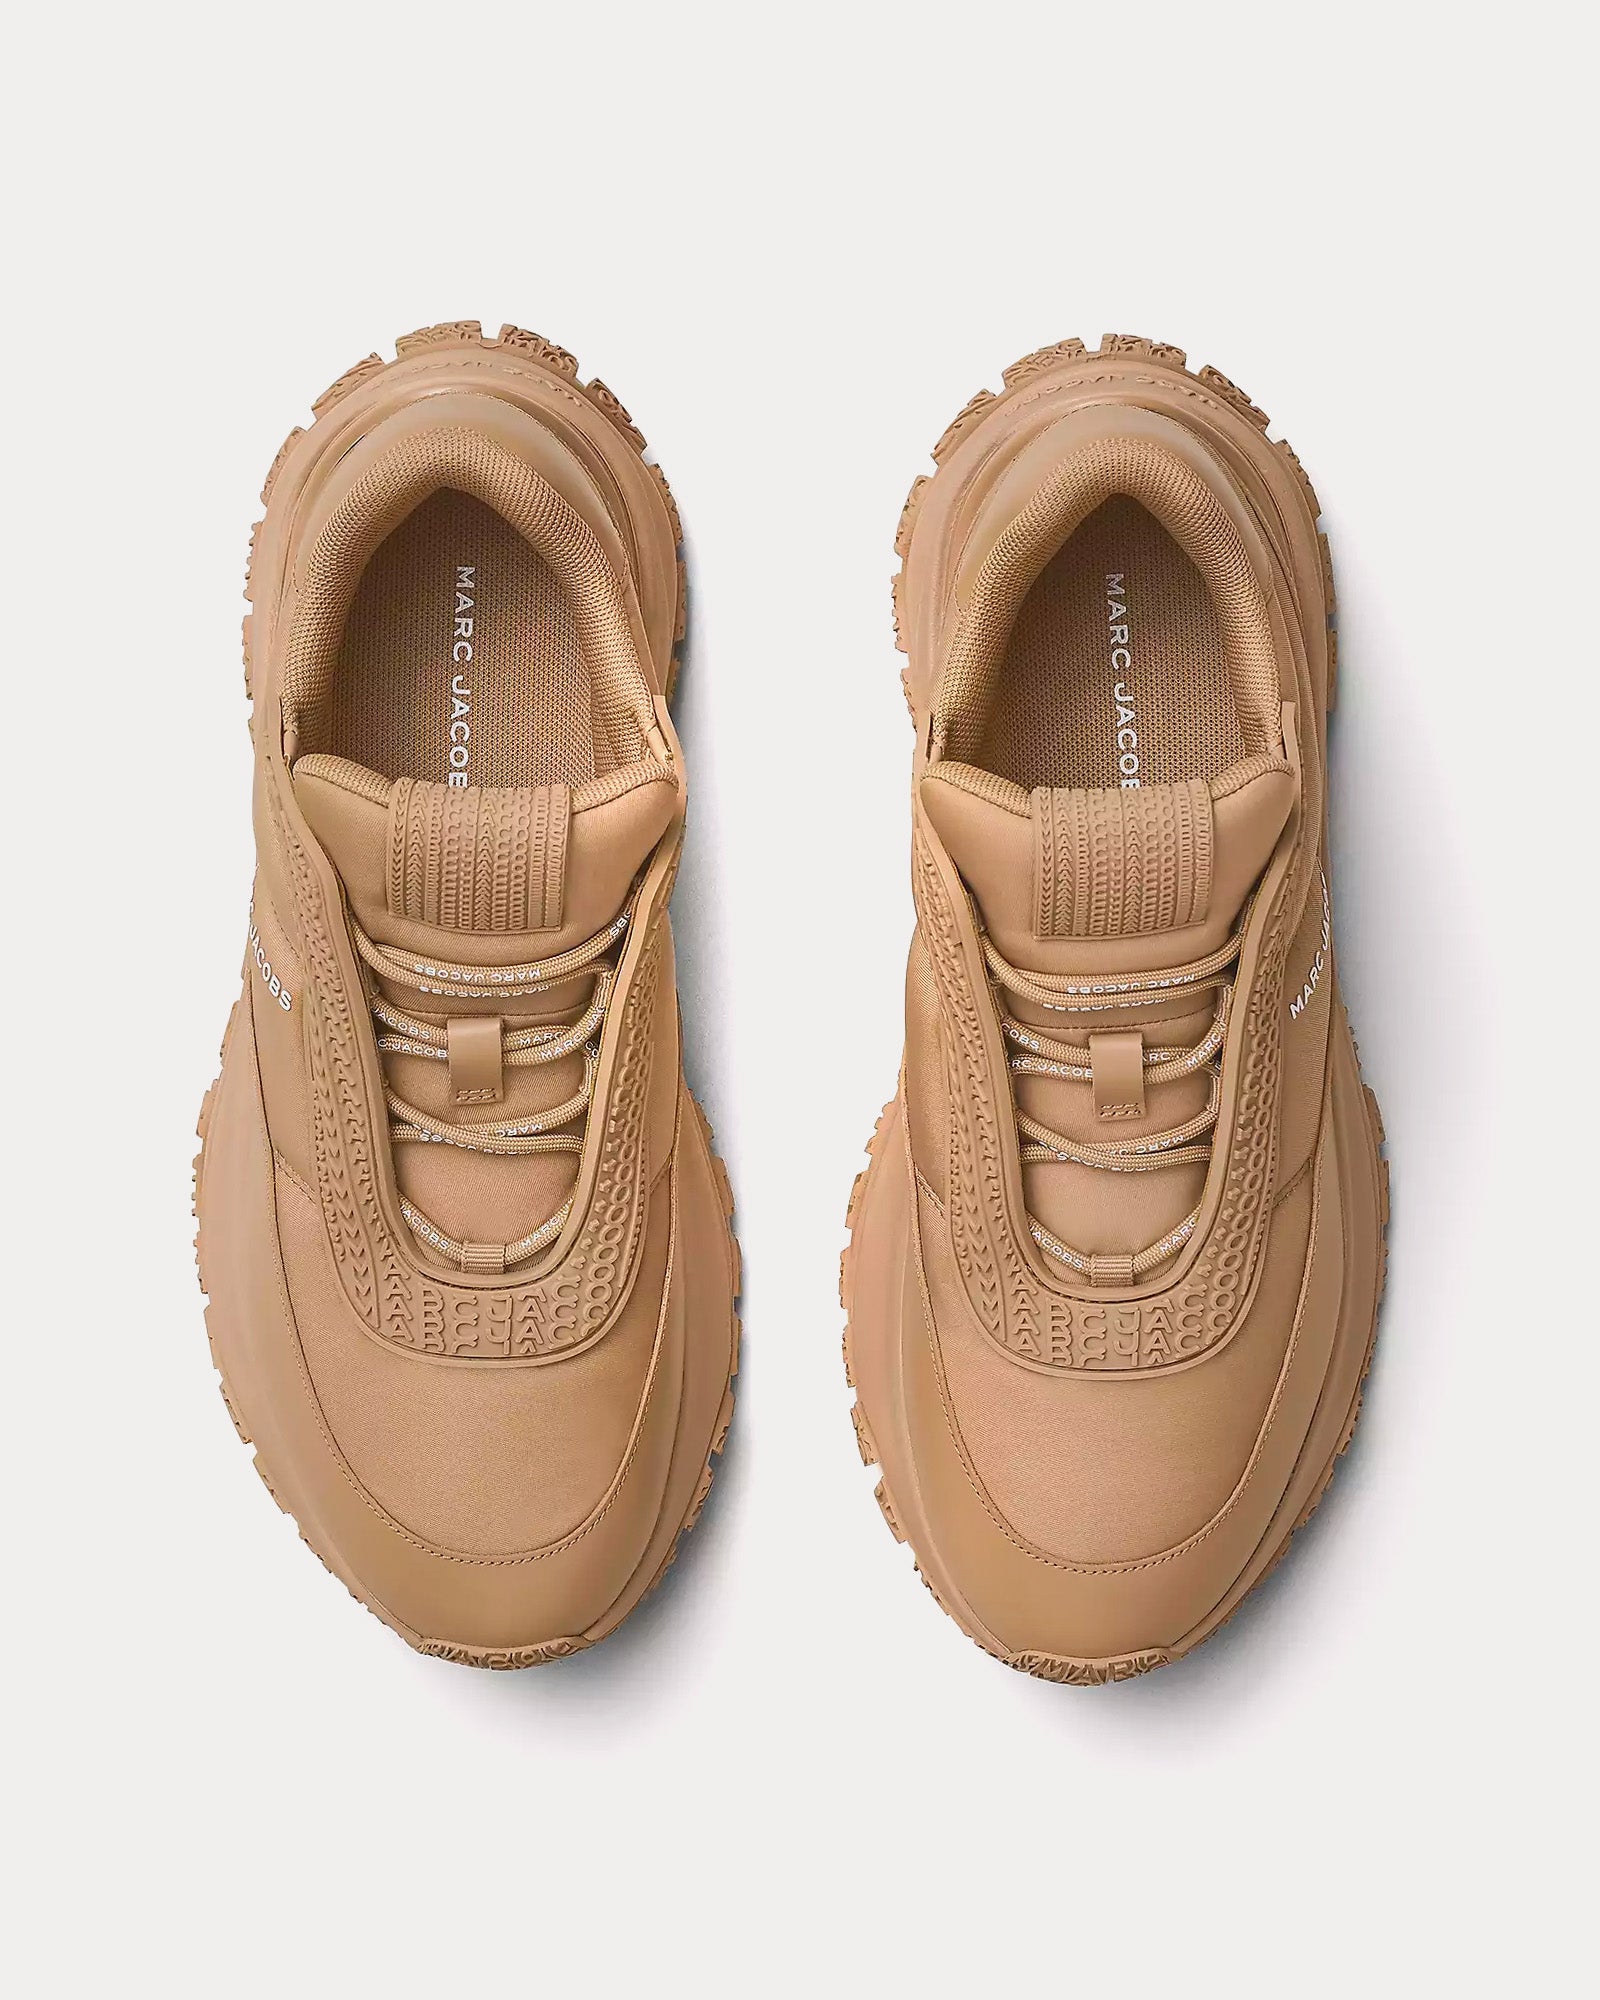 Marc Jacobs - The Lazy Runner Camel Low Top Sneakers